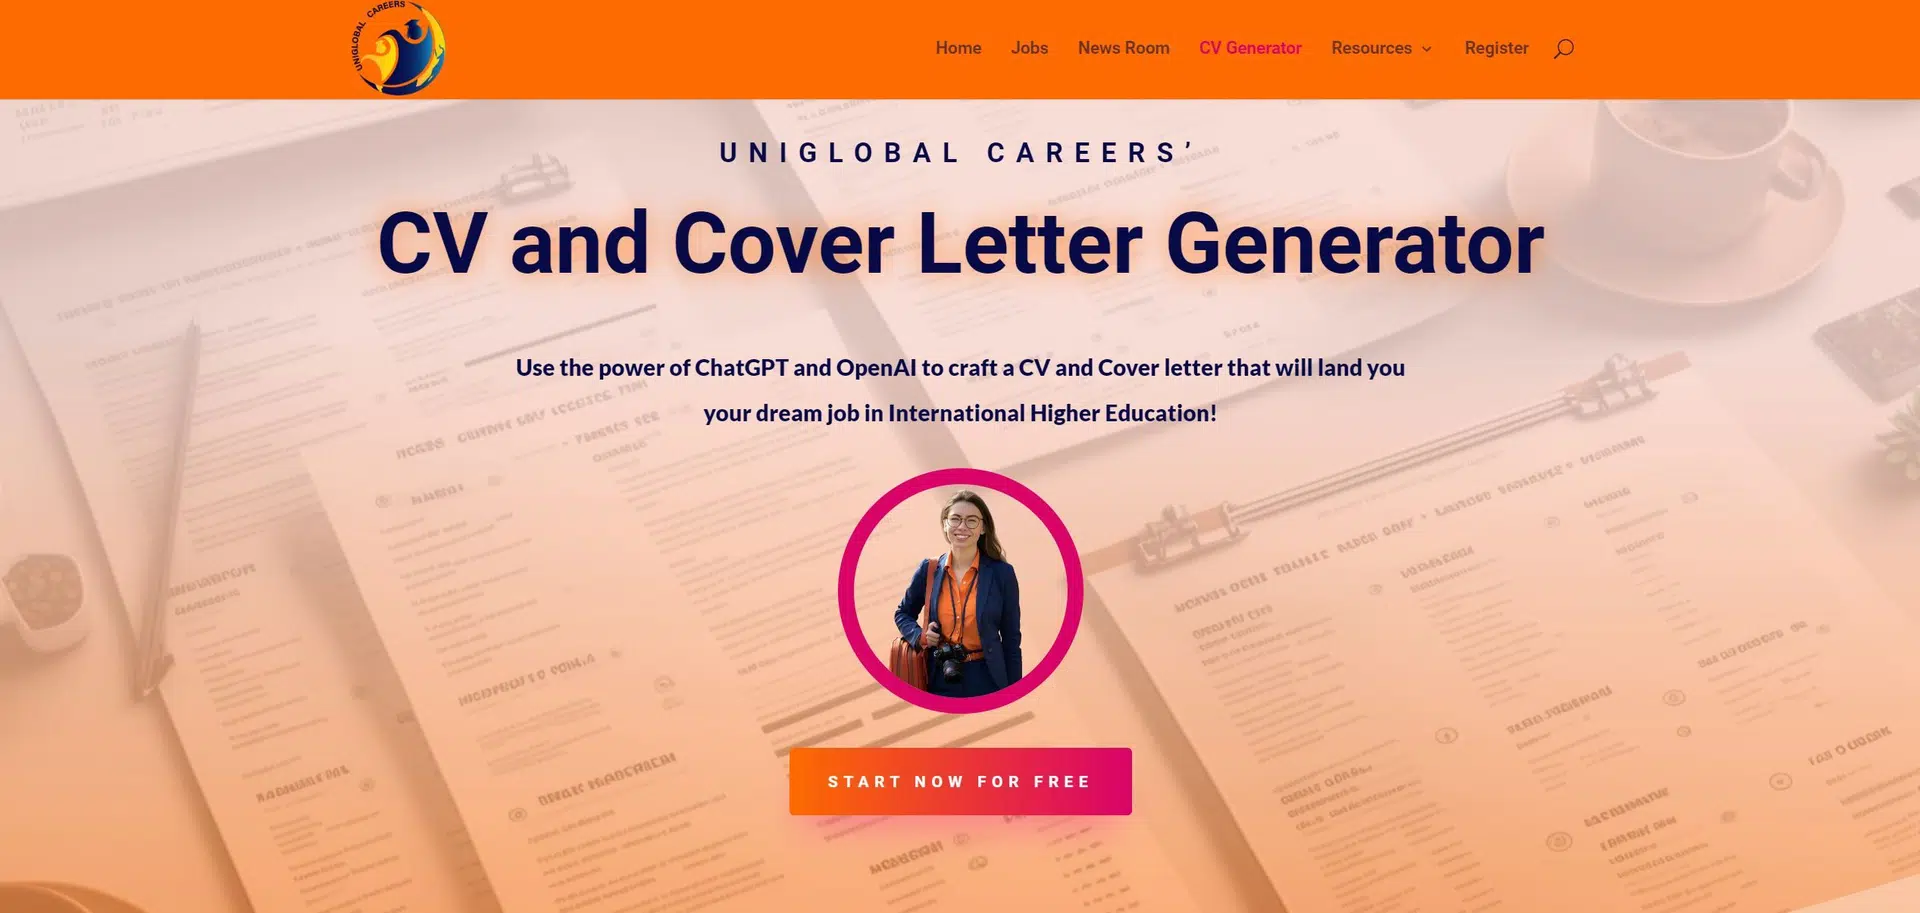 UniGlobal CV and Cover Letter Generatorwebsite picture